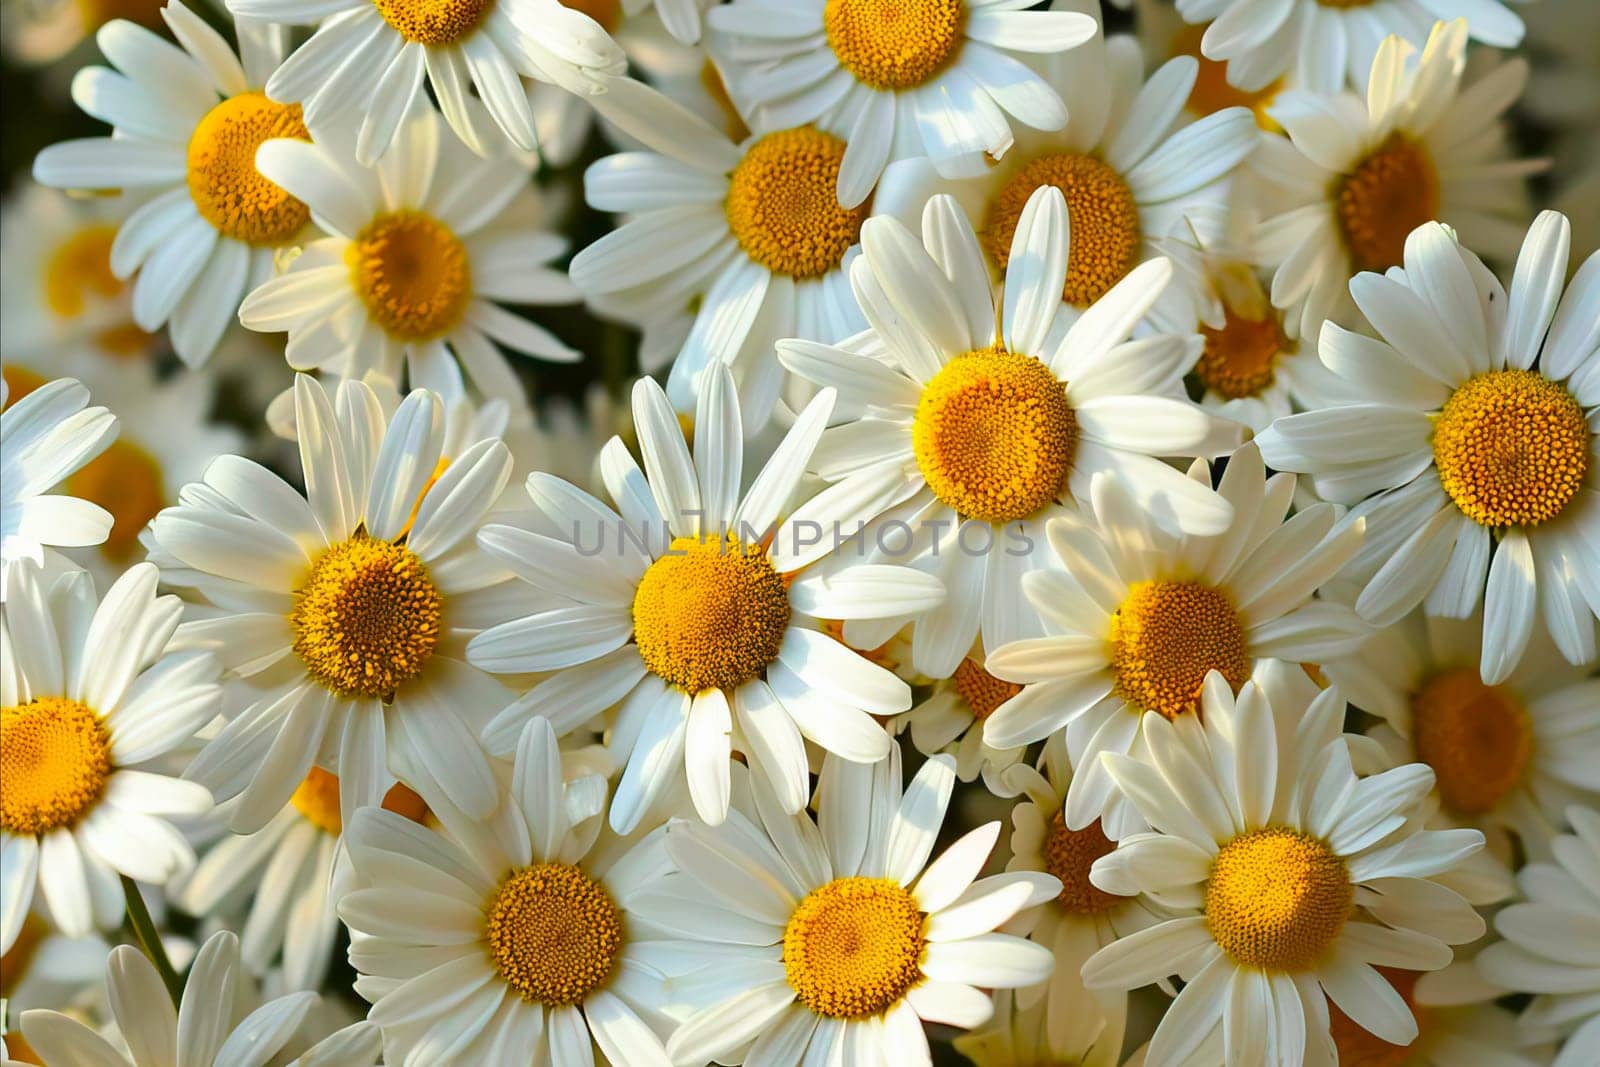 A Close Up of White Daisies Flowers. by vladimka